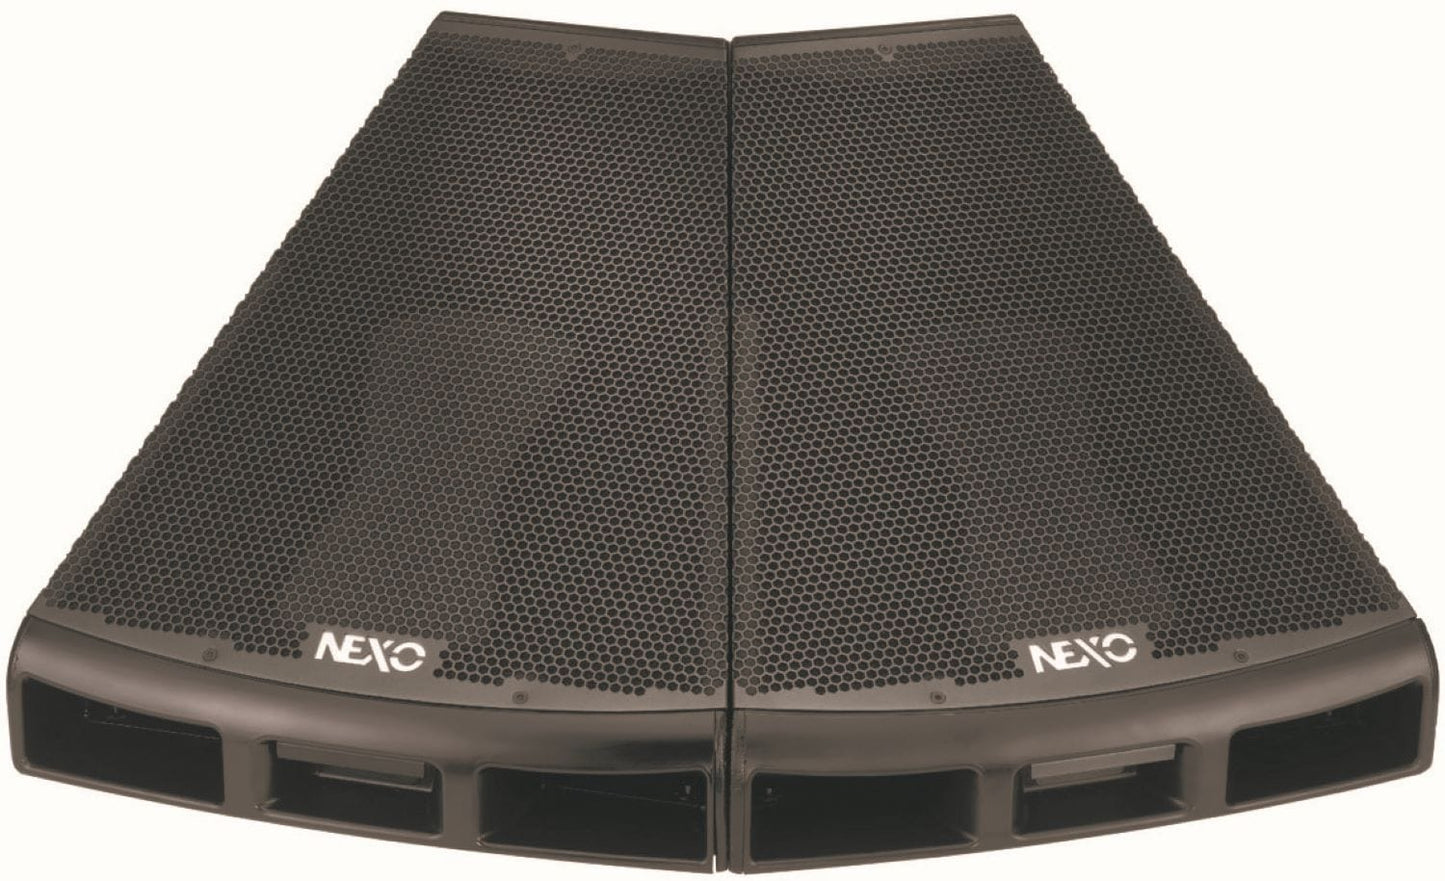 NEXO 45N12 12 Inch Arrayable Wedge Monitor - PSSL ProSound and Stage Lighting